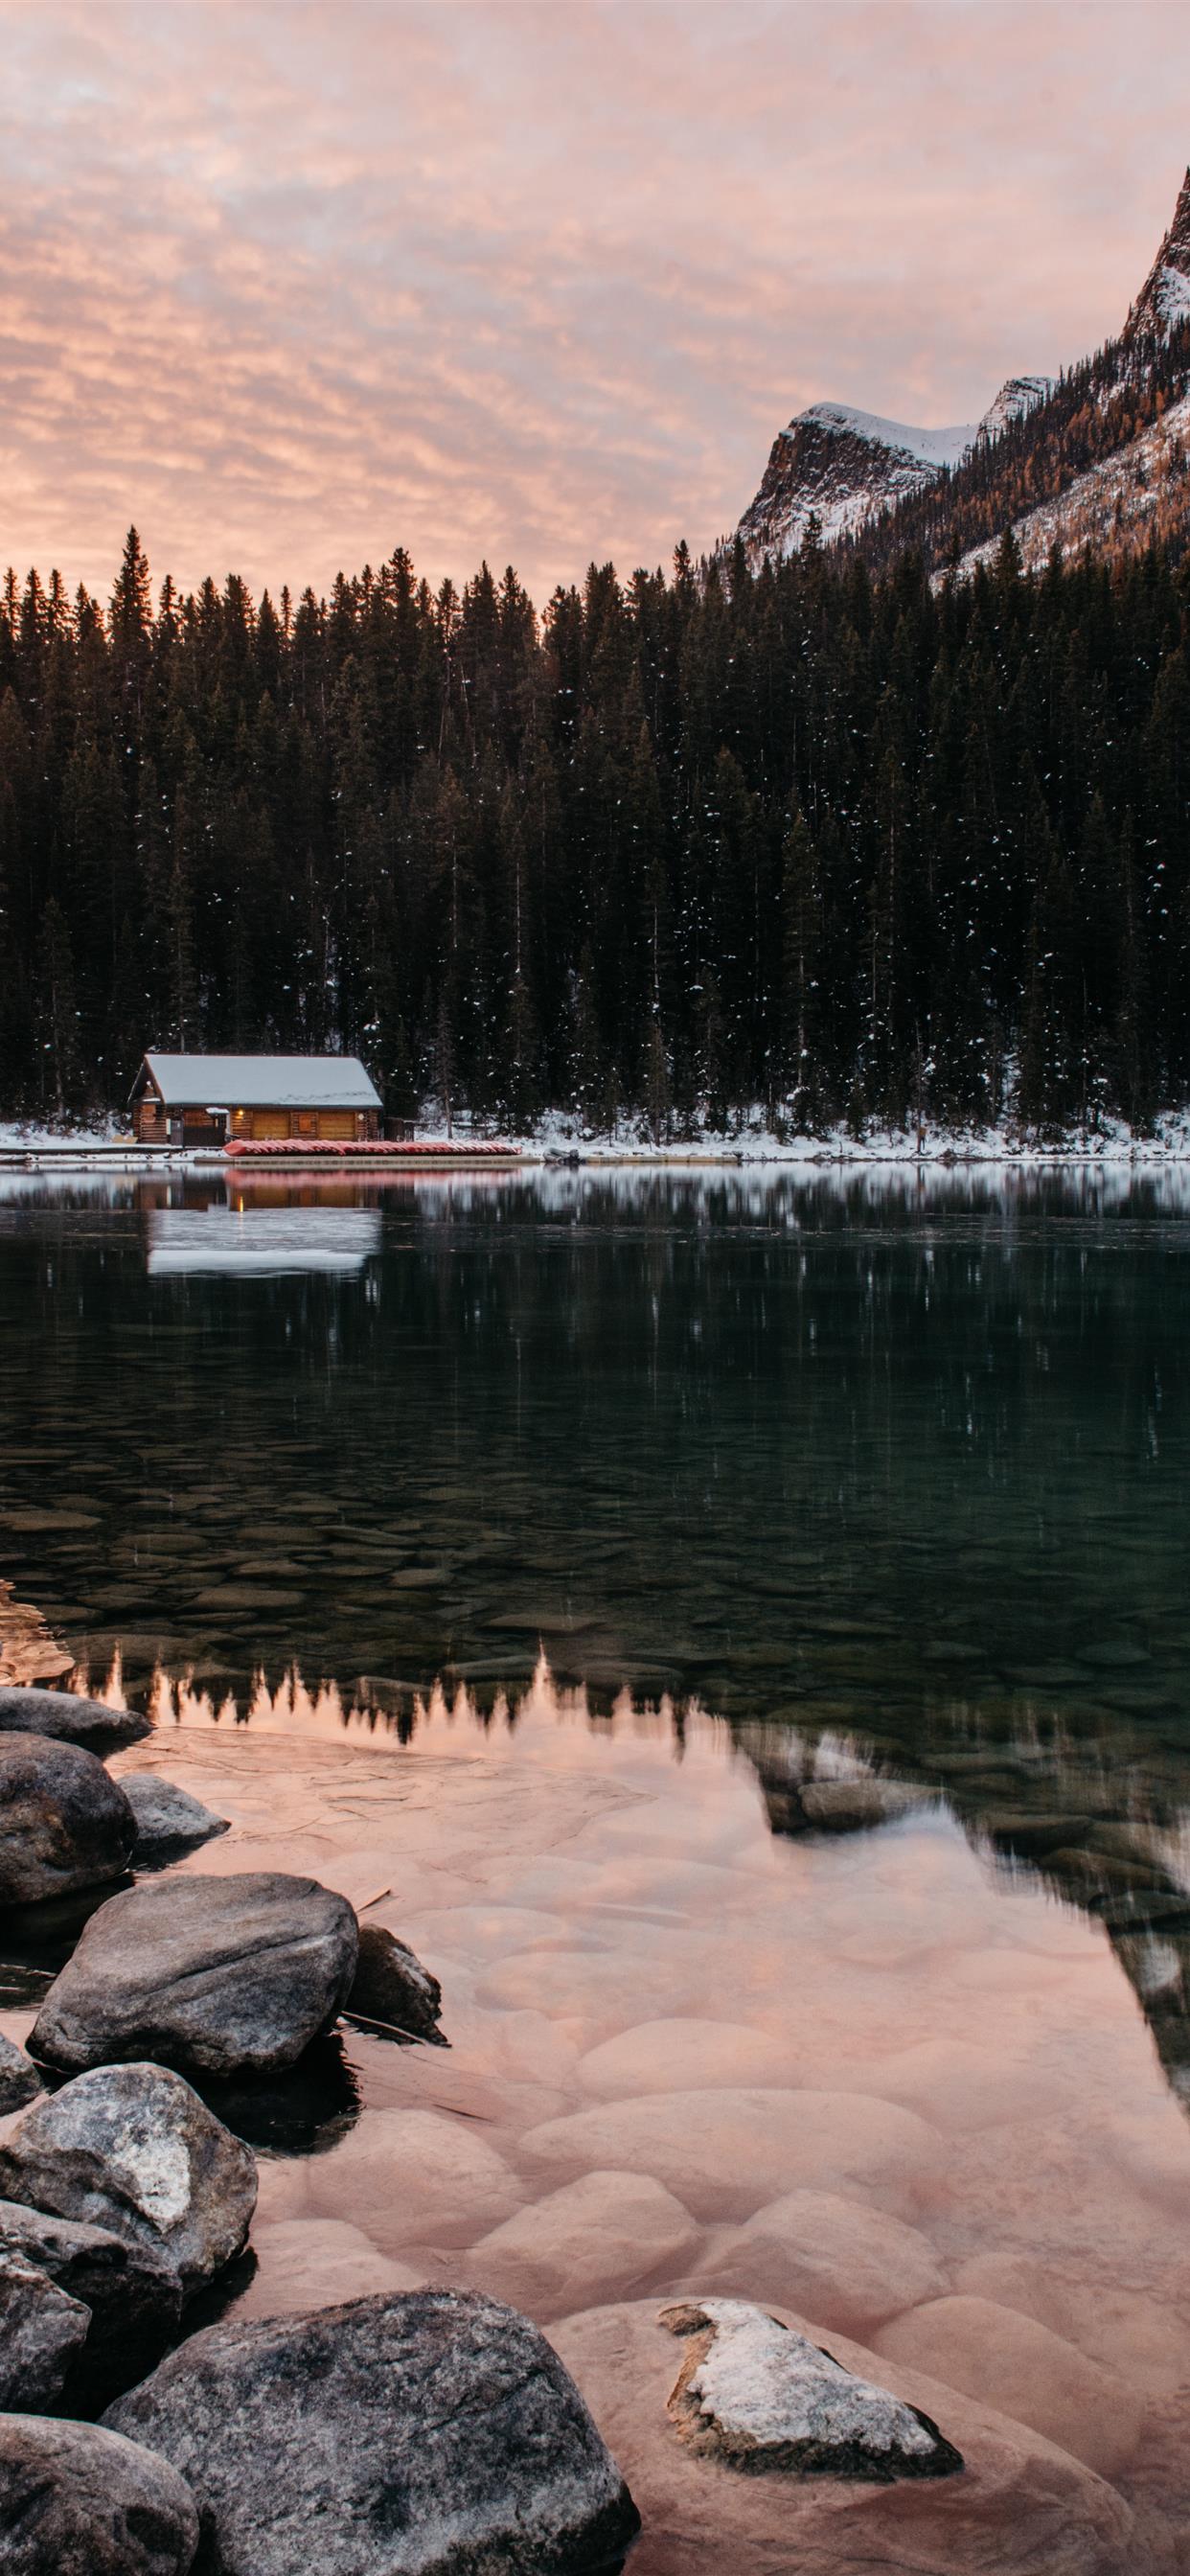 A small house sits on a lake surrounded by trees and mountains. - Winter, cozy, snow